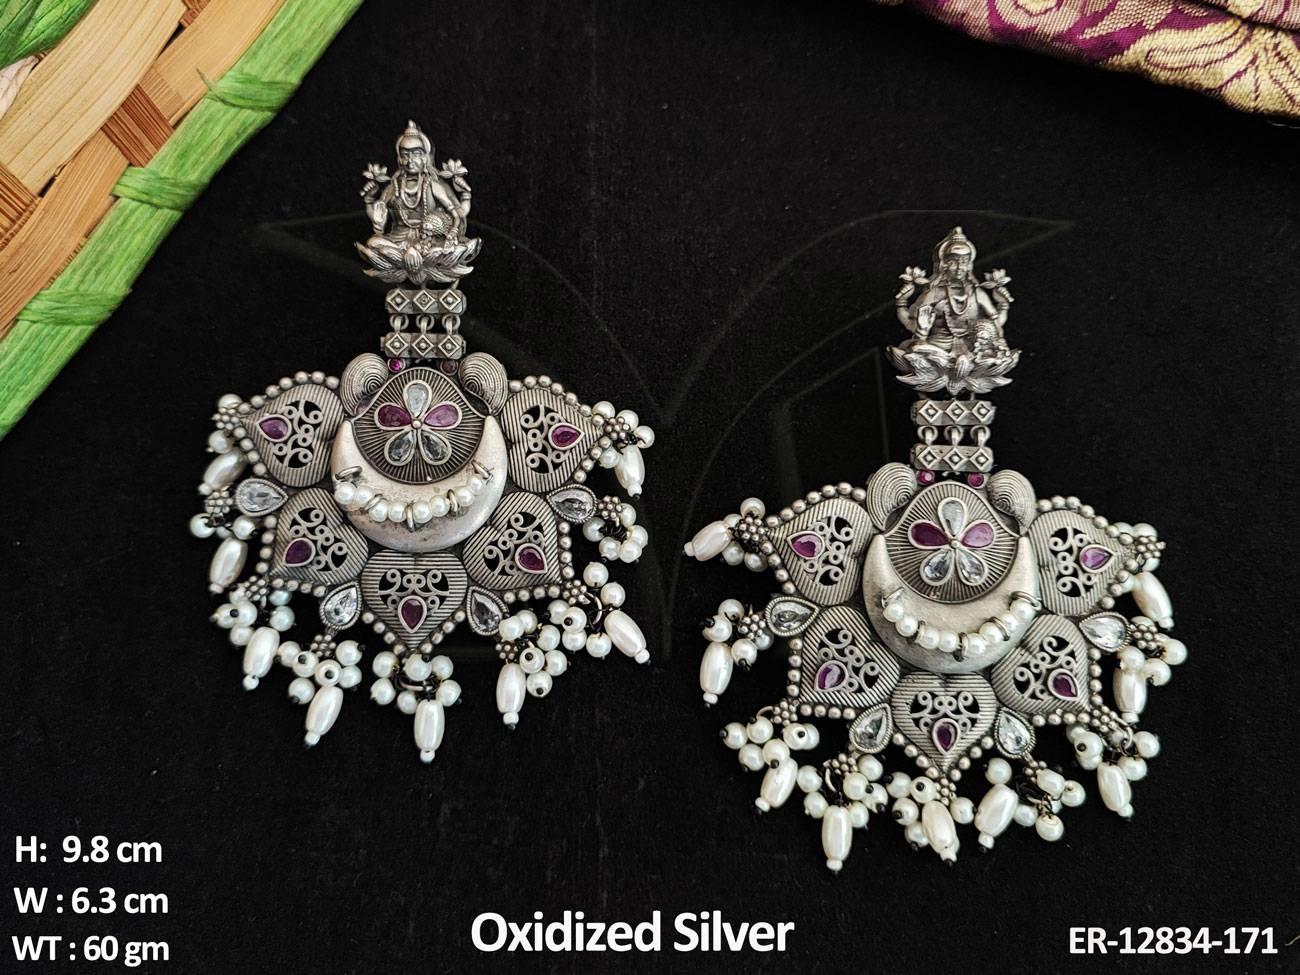 Expertly crafted for the discerning bride, these wedding wear oxidized dangler earrings will add elegance and drama to any bridal ensemble.